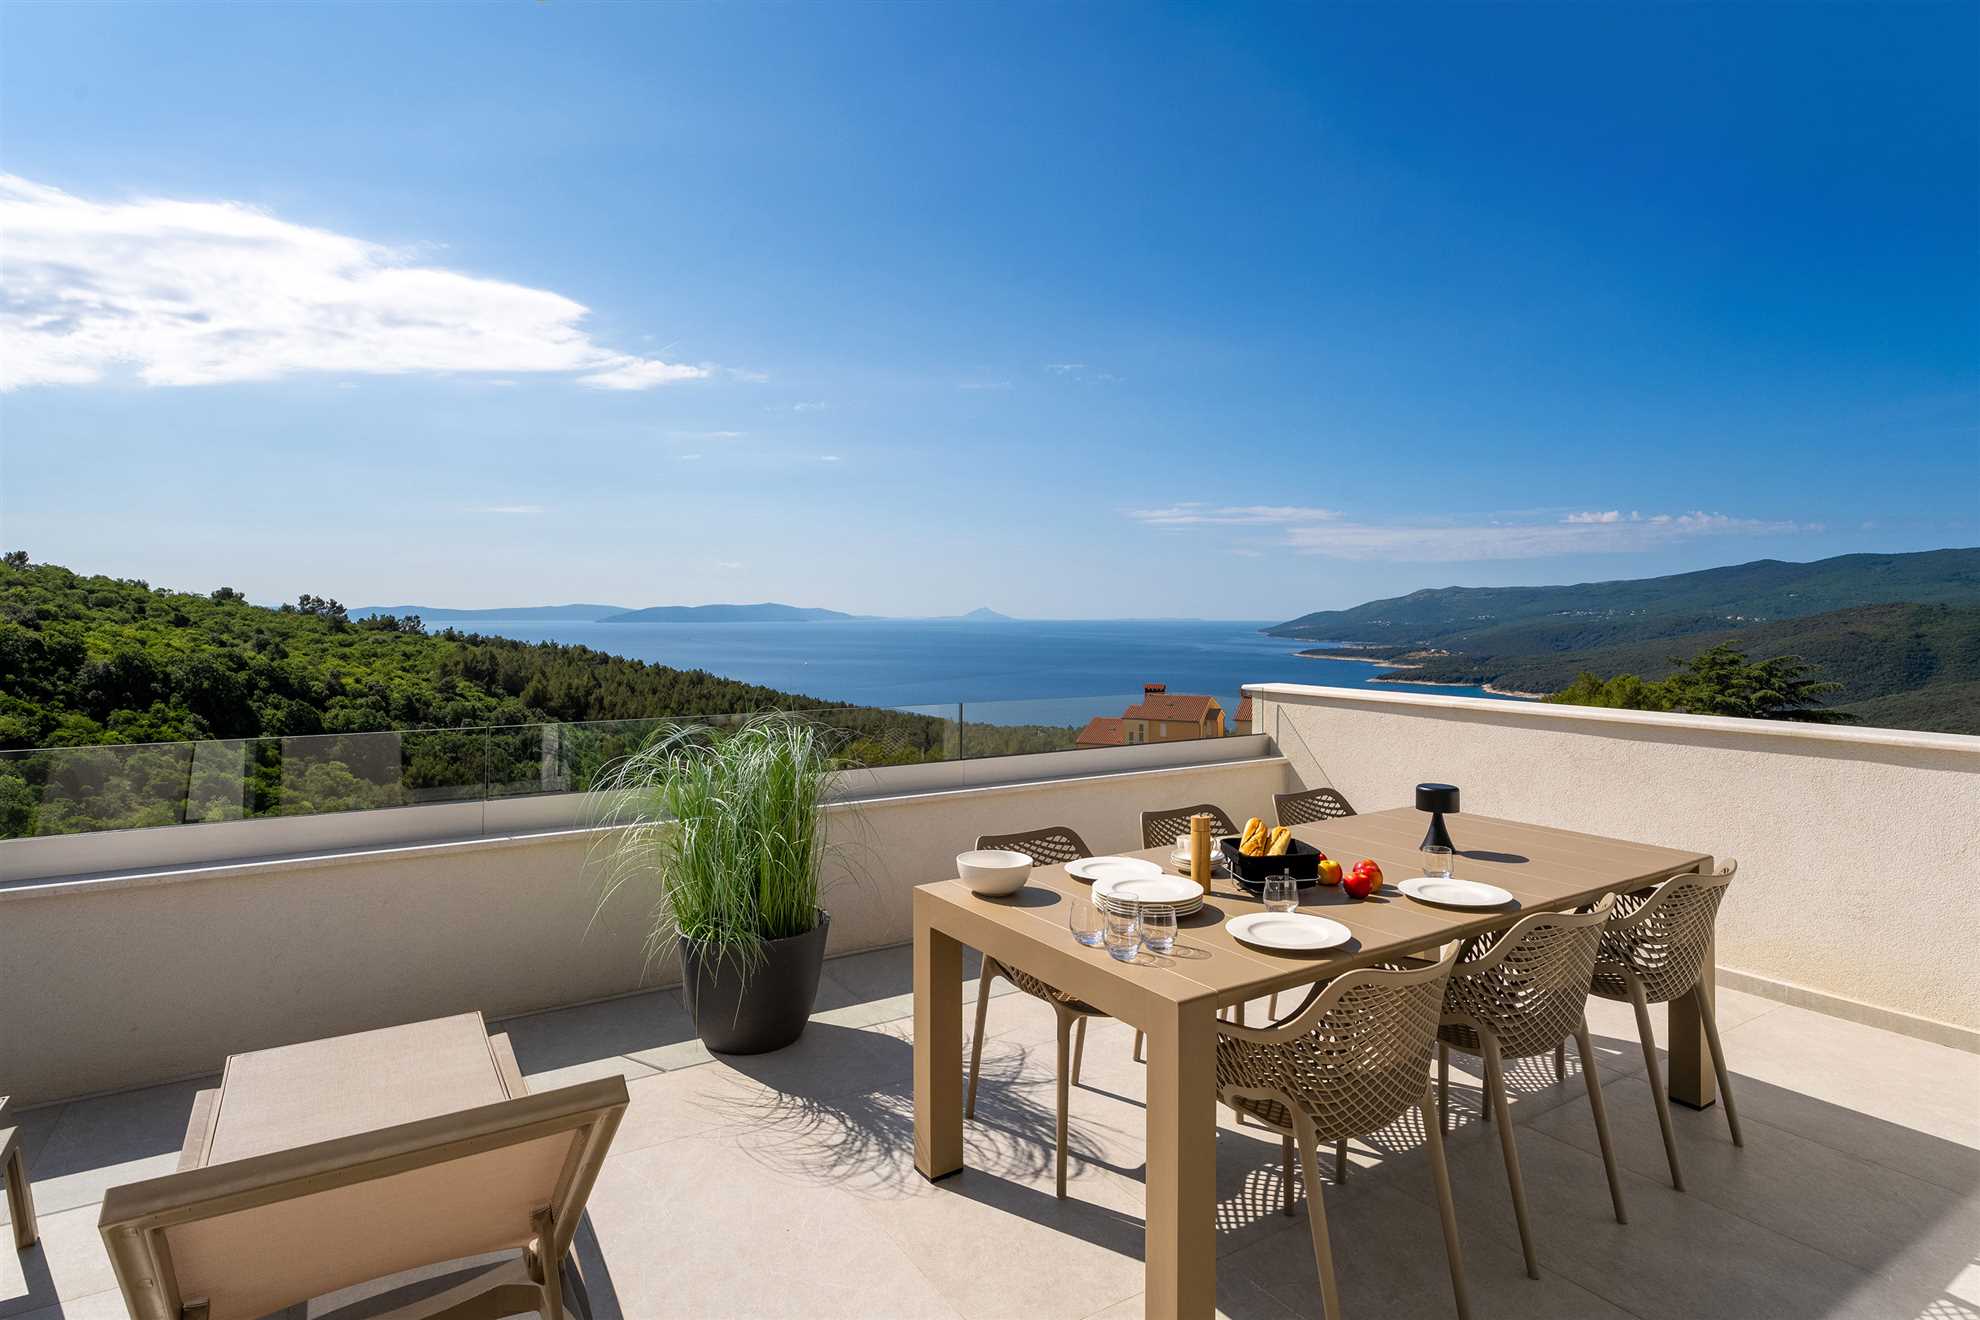 Image of Apartment Dora Mar with spectacular seaview